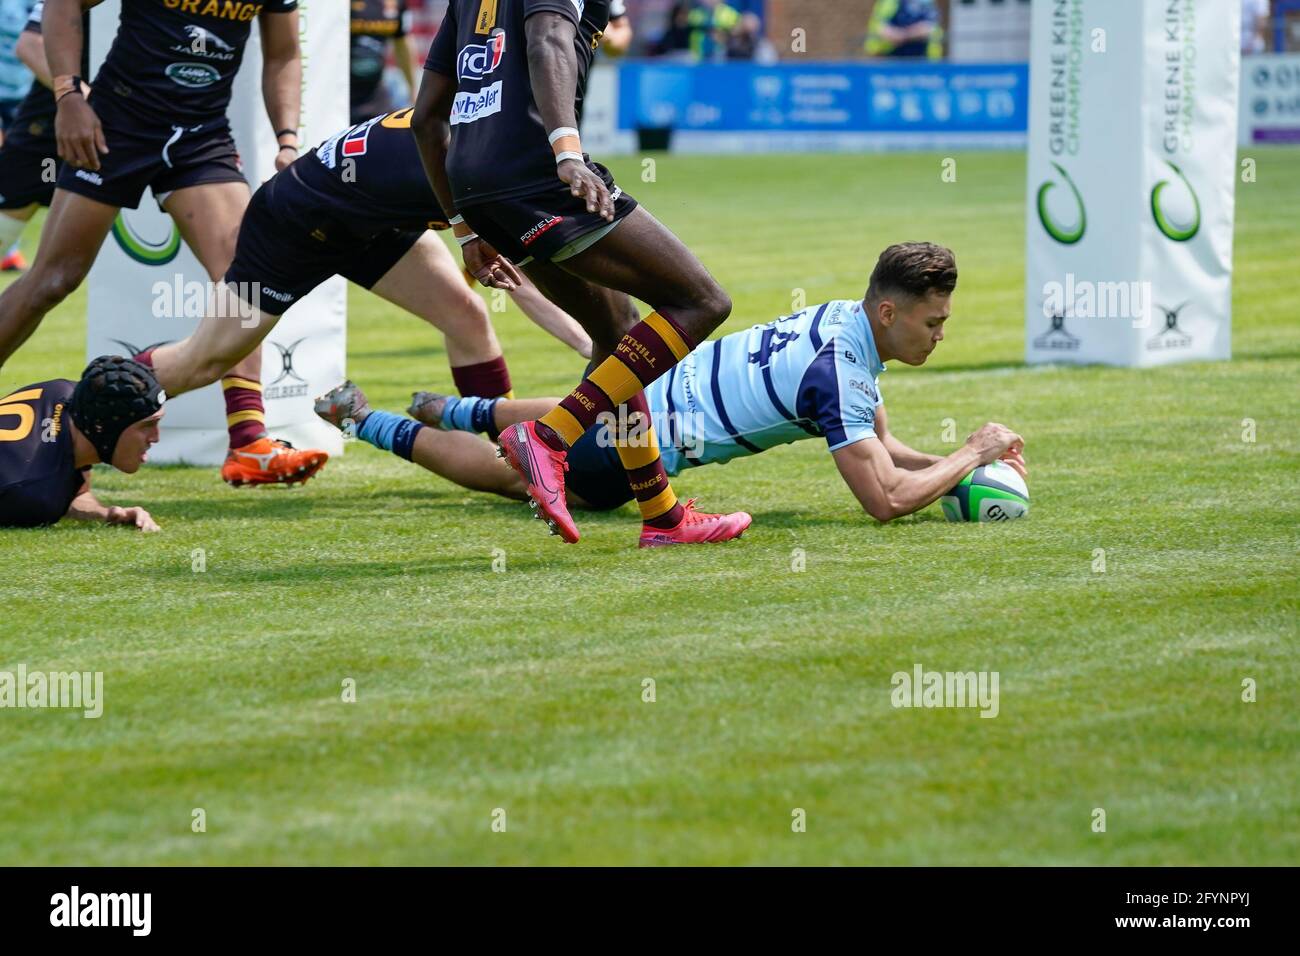 Josh GILLESPIE (14) of Bedford Blues scores the opening try during the Greene King IPA Championship match between Bedford Blues and Ampthill RUFC at Goldington Road, Bedford, England on 29 May 2021. Photo by David Horn. Stock Photo